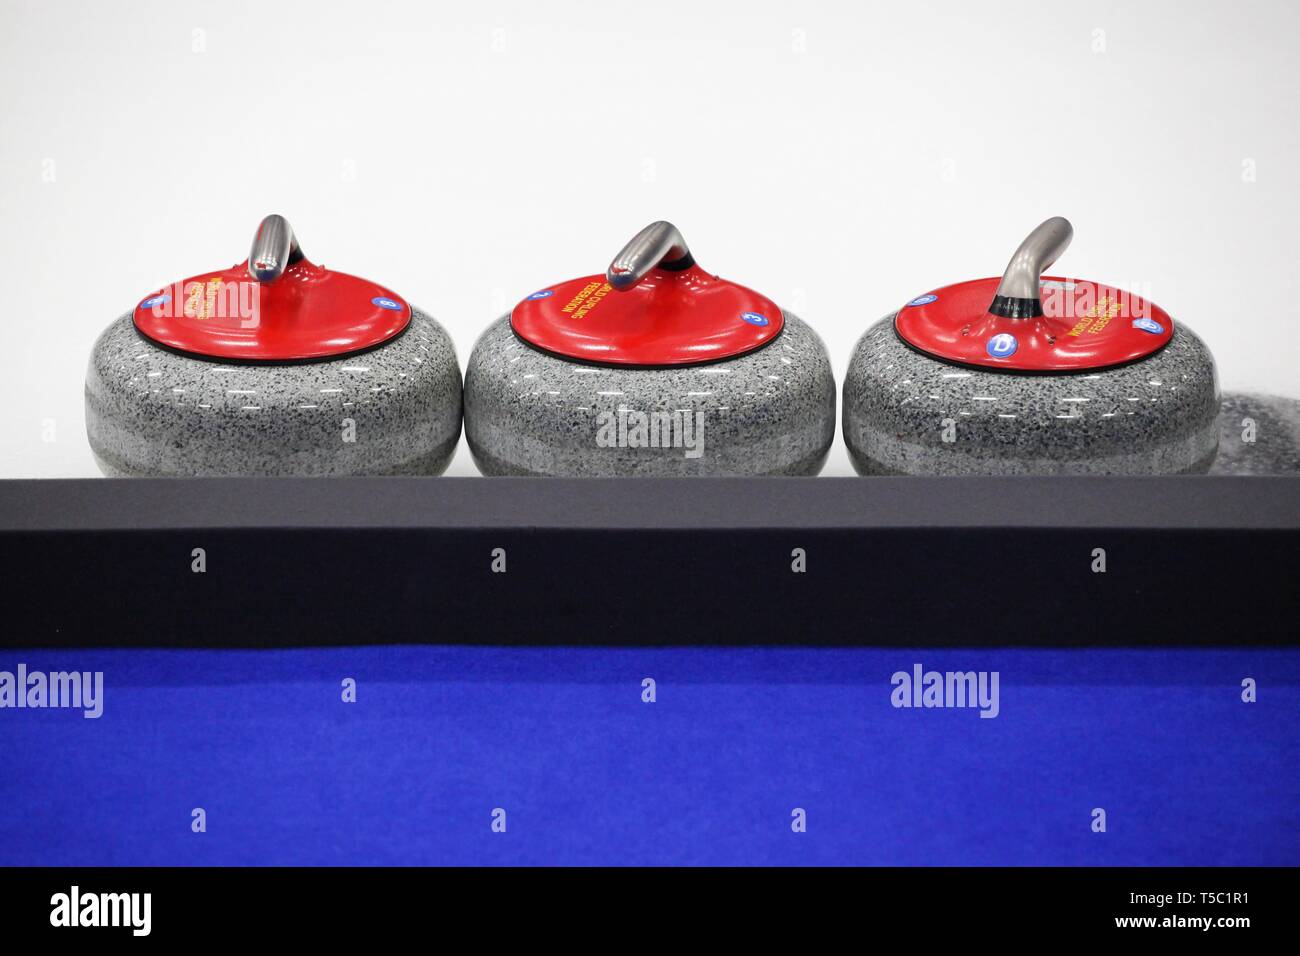 Silkeborg, Denmark - March 22, 2019: Curling stones on ice during the 2019 world women's curling championship in Silkeborg, Denmark Stock Photo